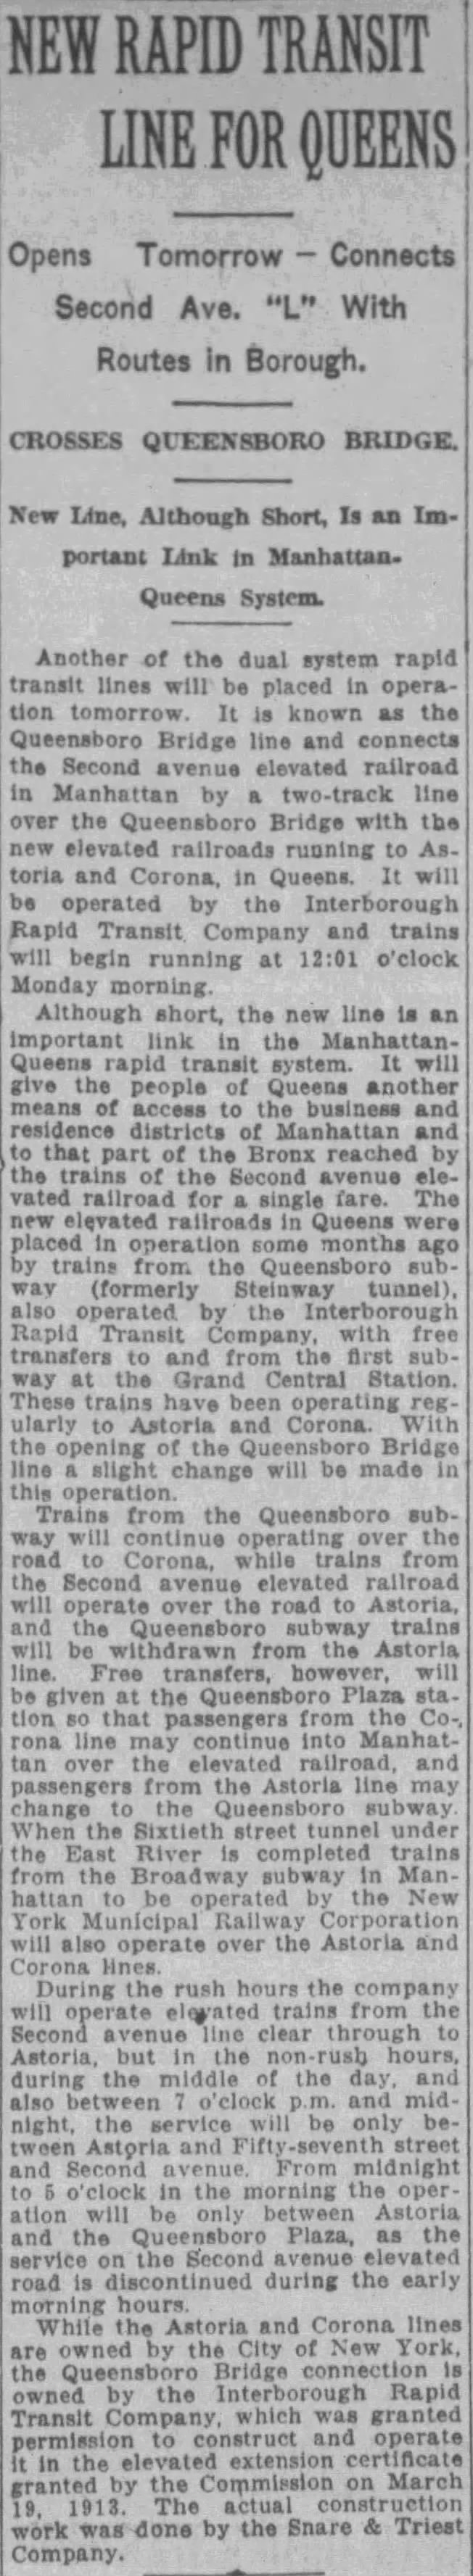 New Rapid Transit Line for Queens